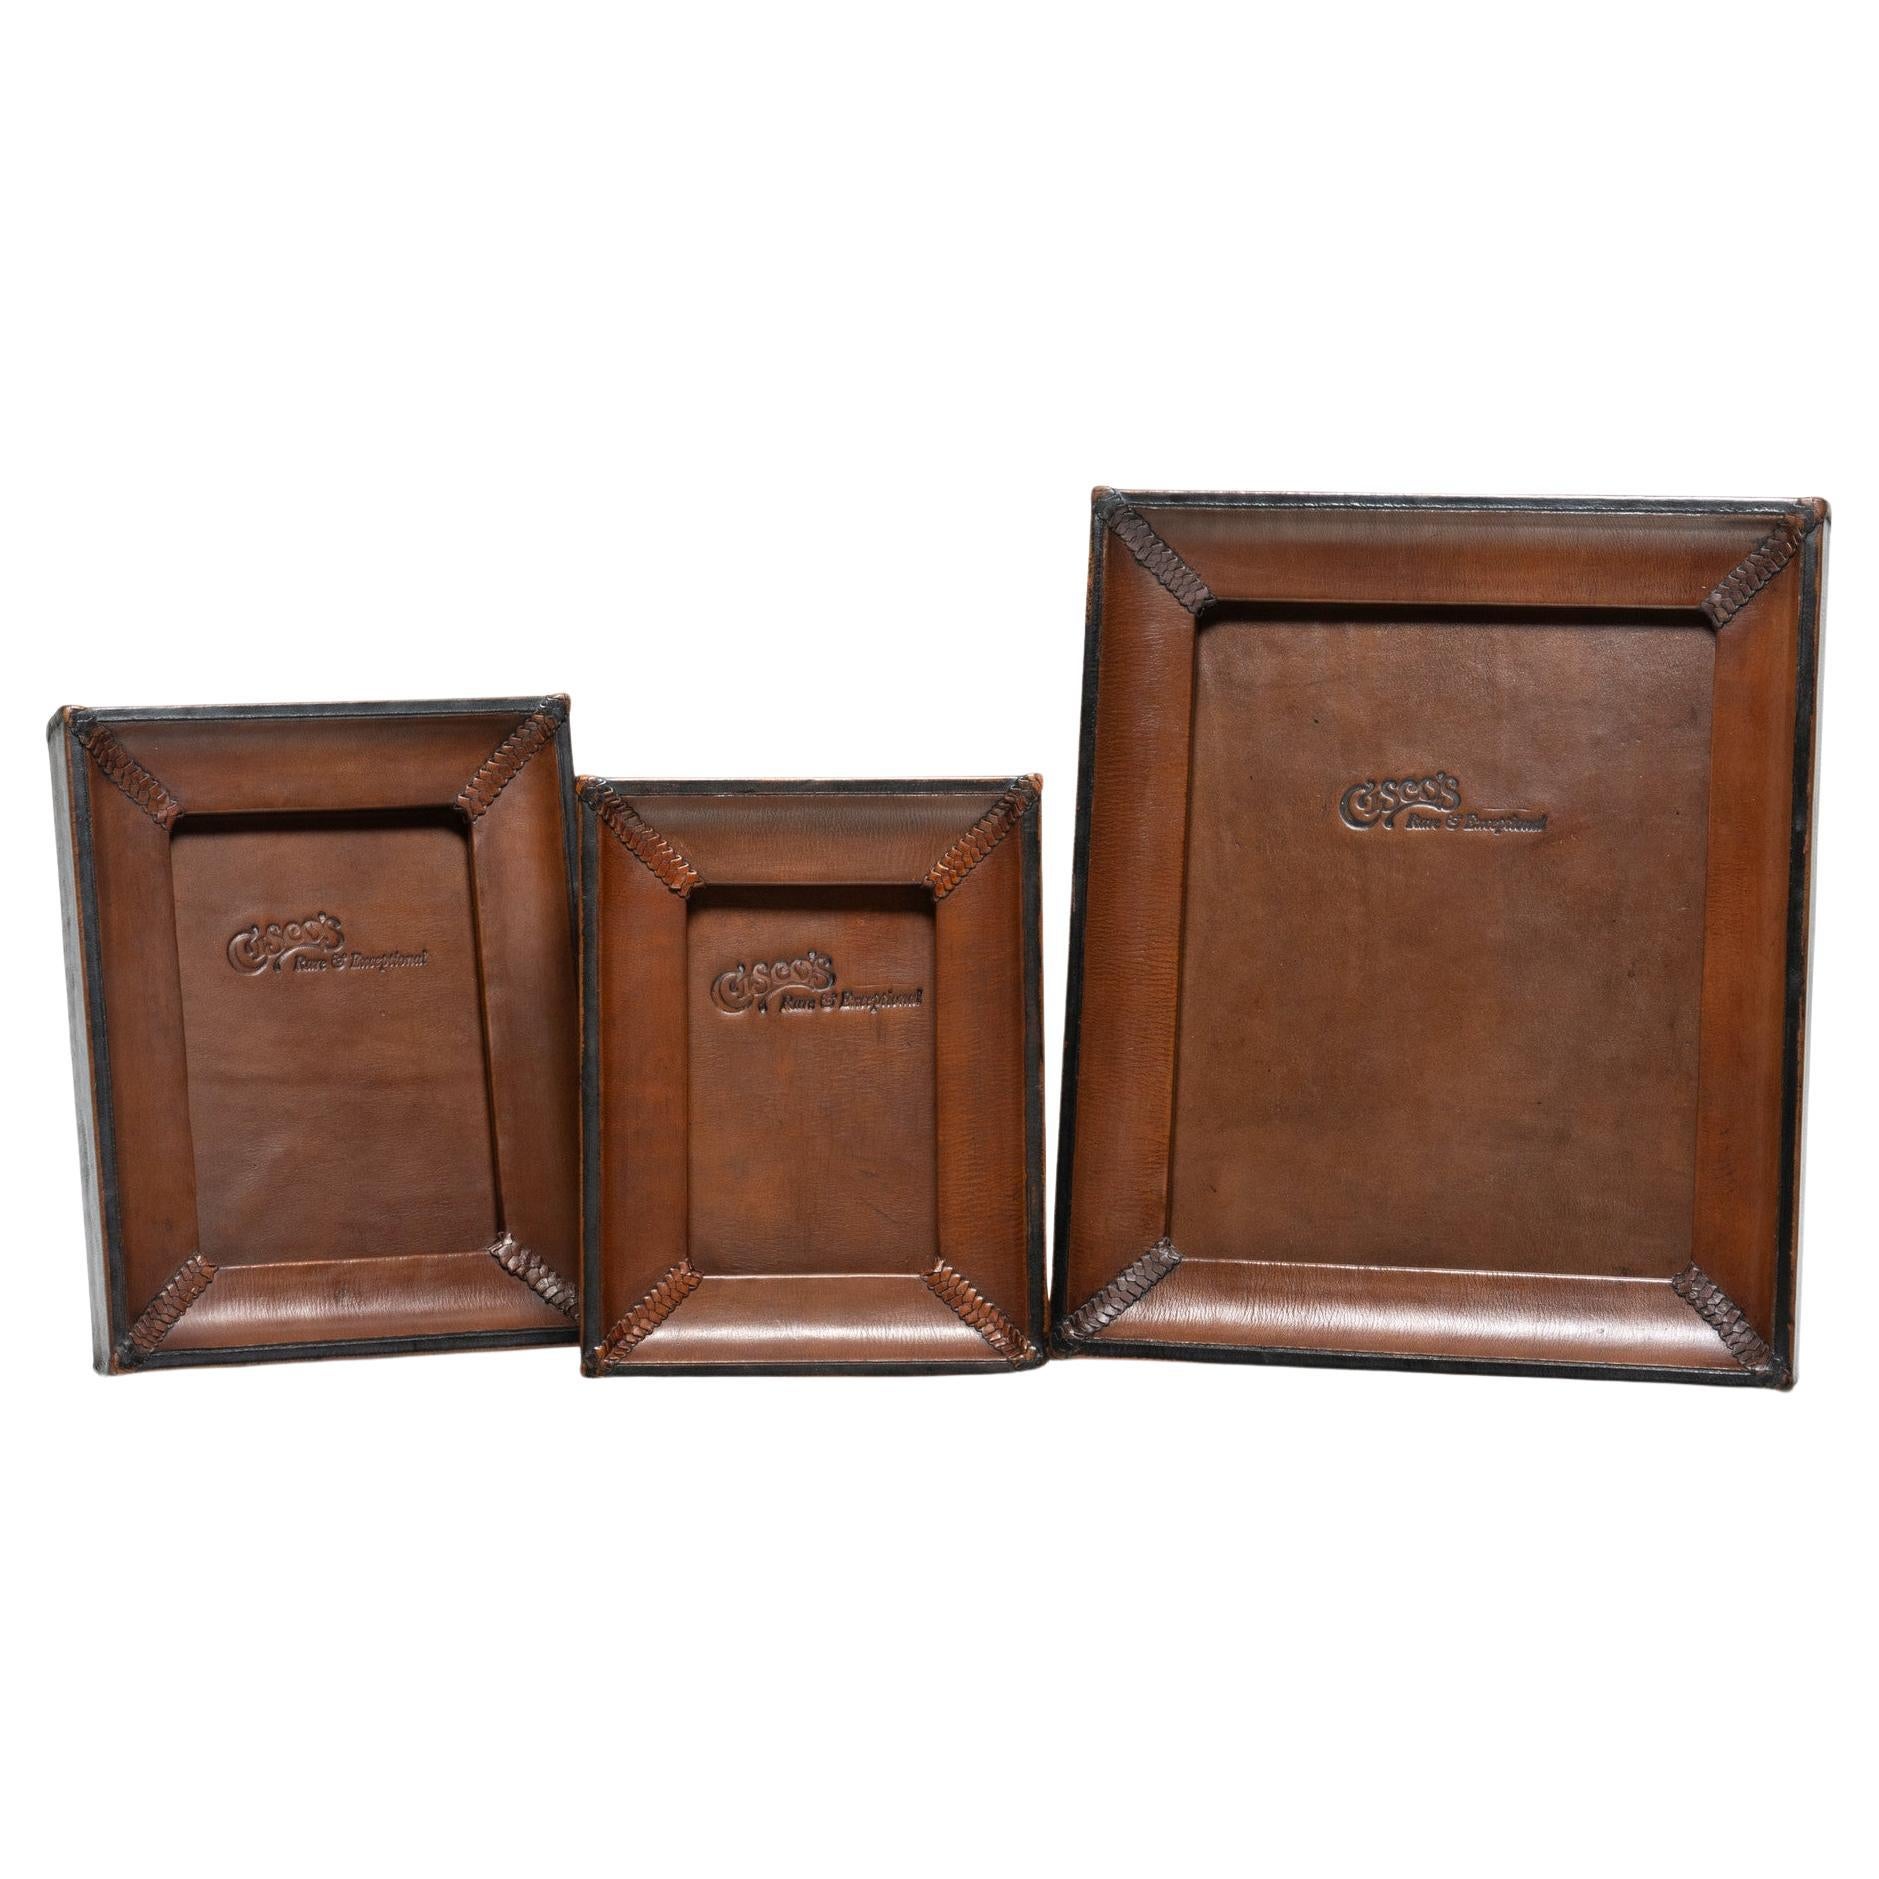 8x10 Medium Brown and Black Leather Tabletop Picture Frame - The Artisan For Sale